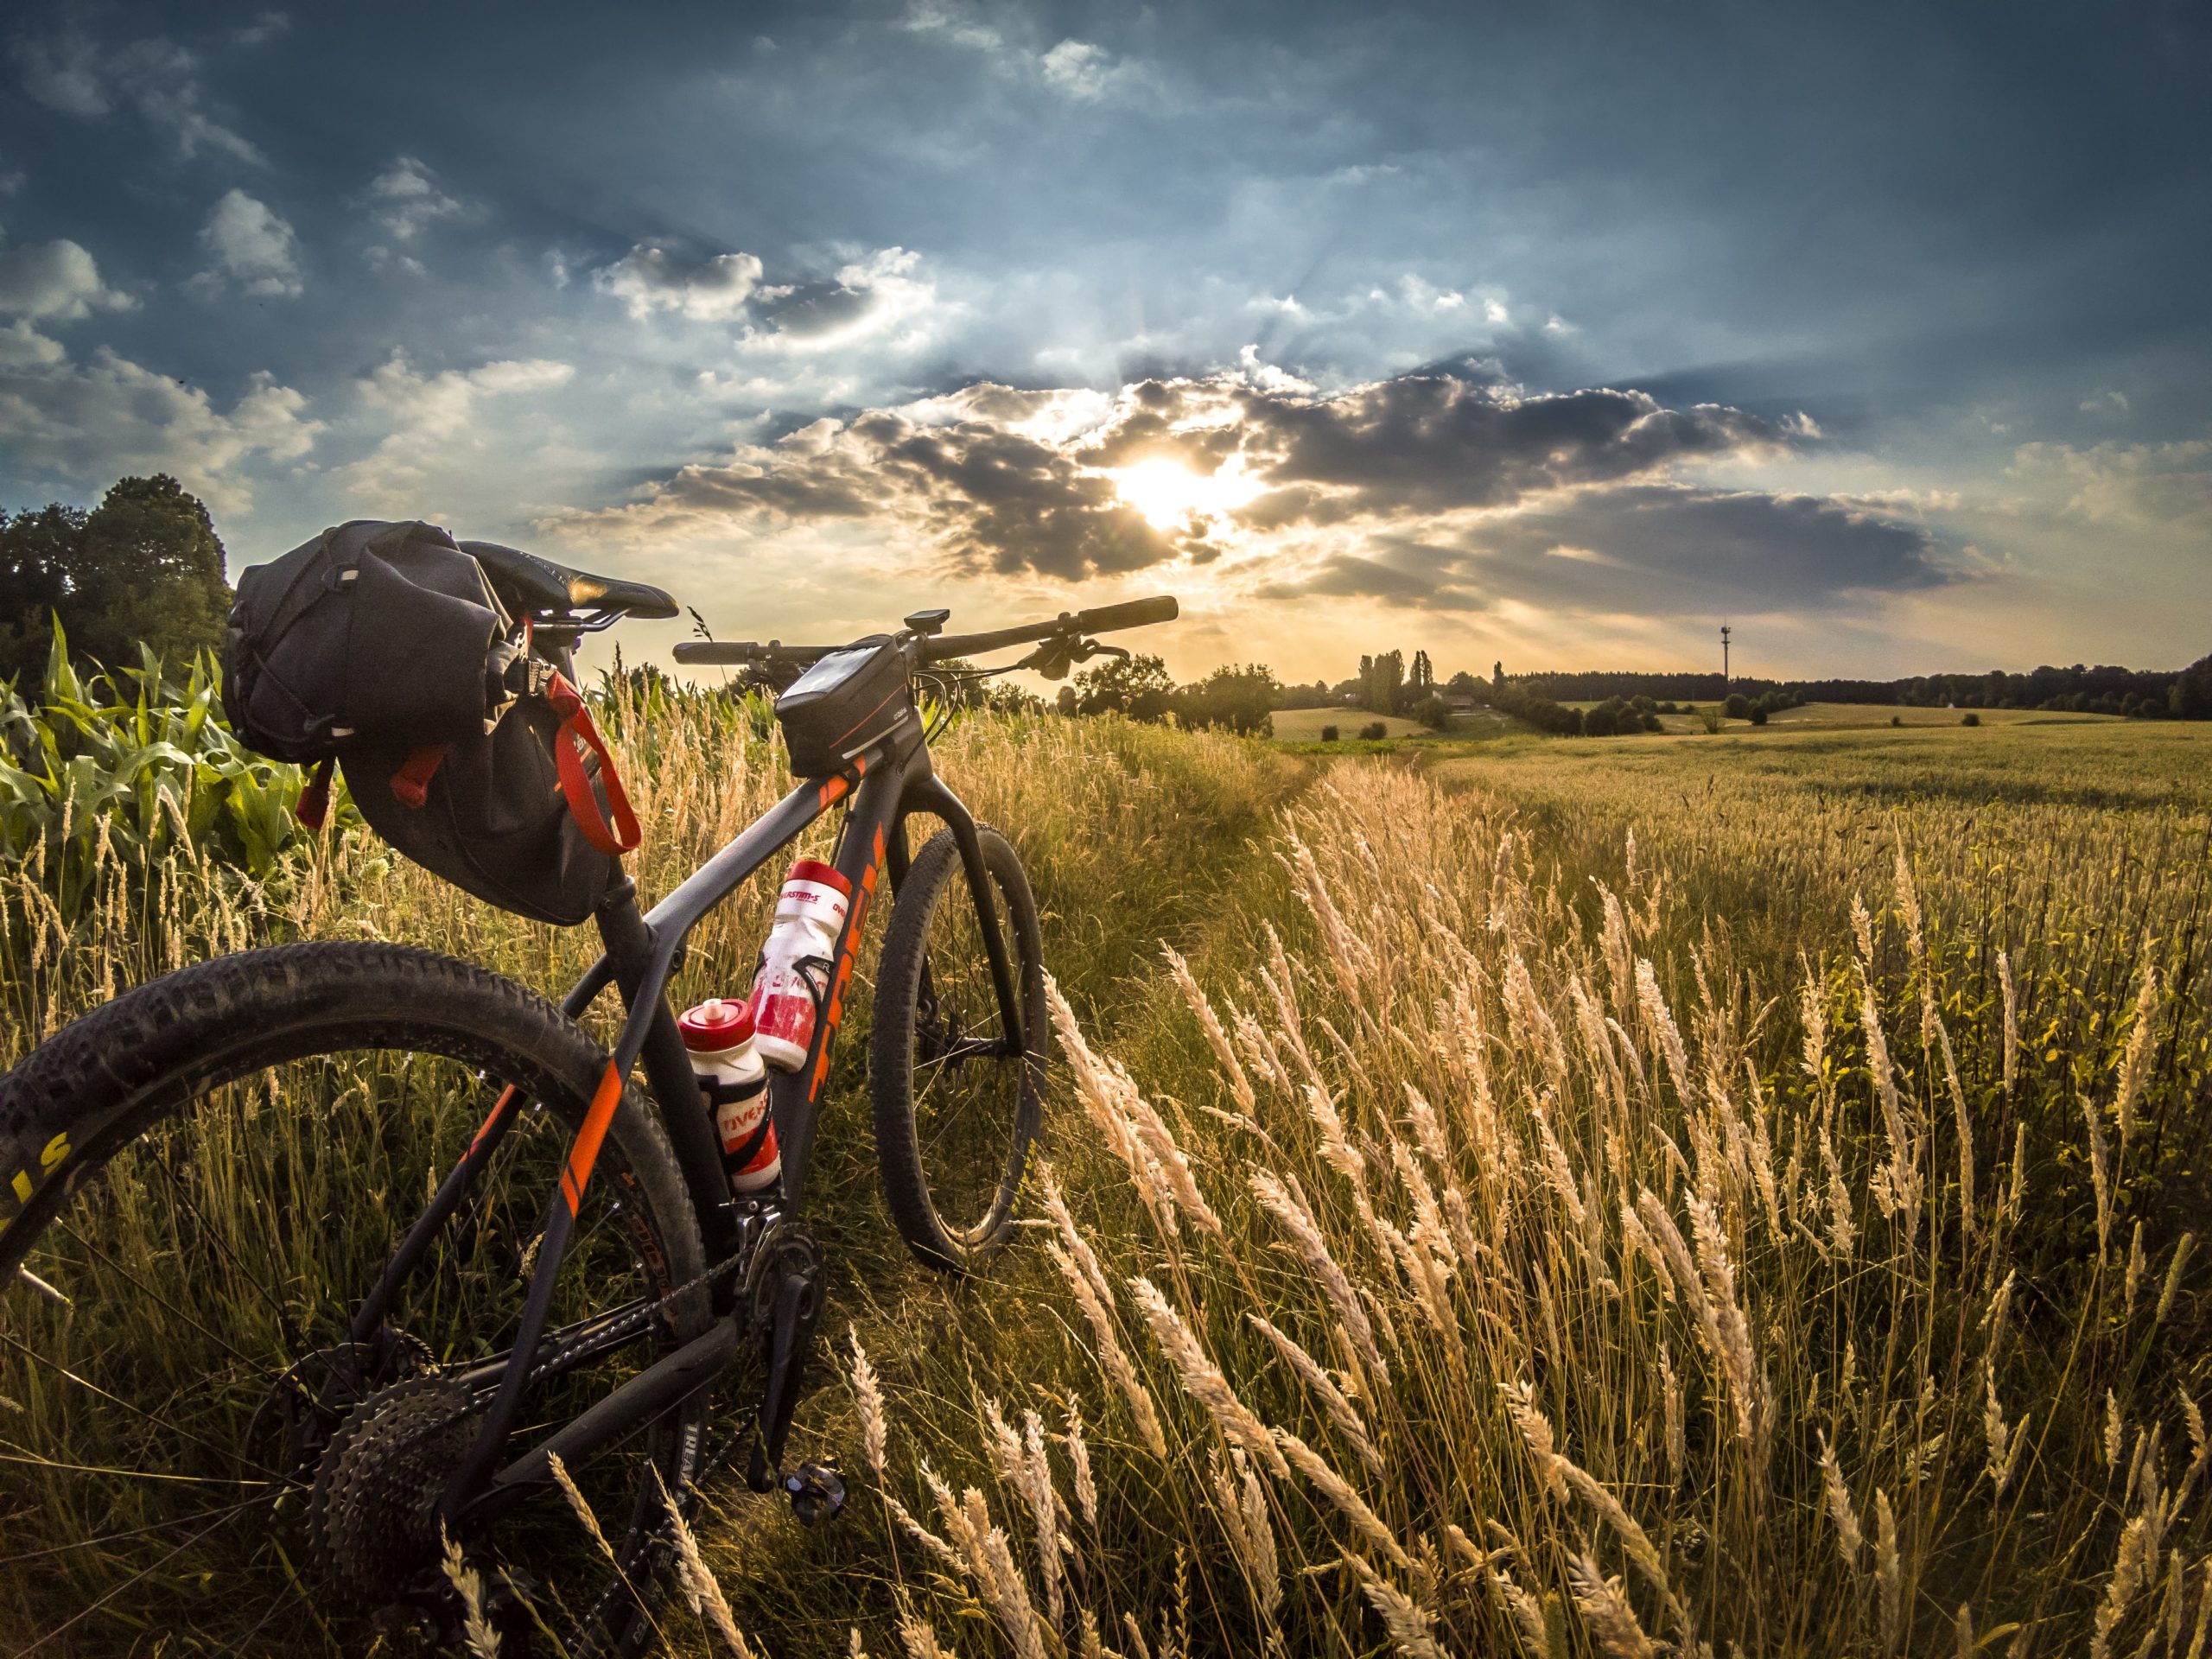 Your Ideal Survival Kit Checklist For Mountain Bike Rides